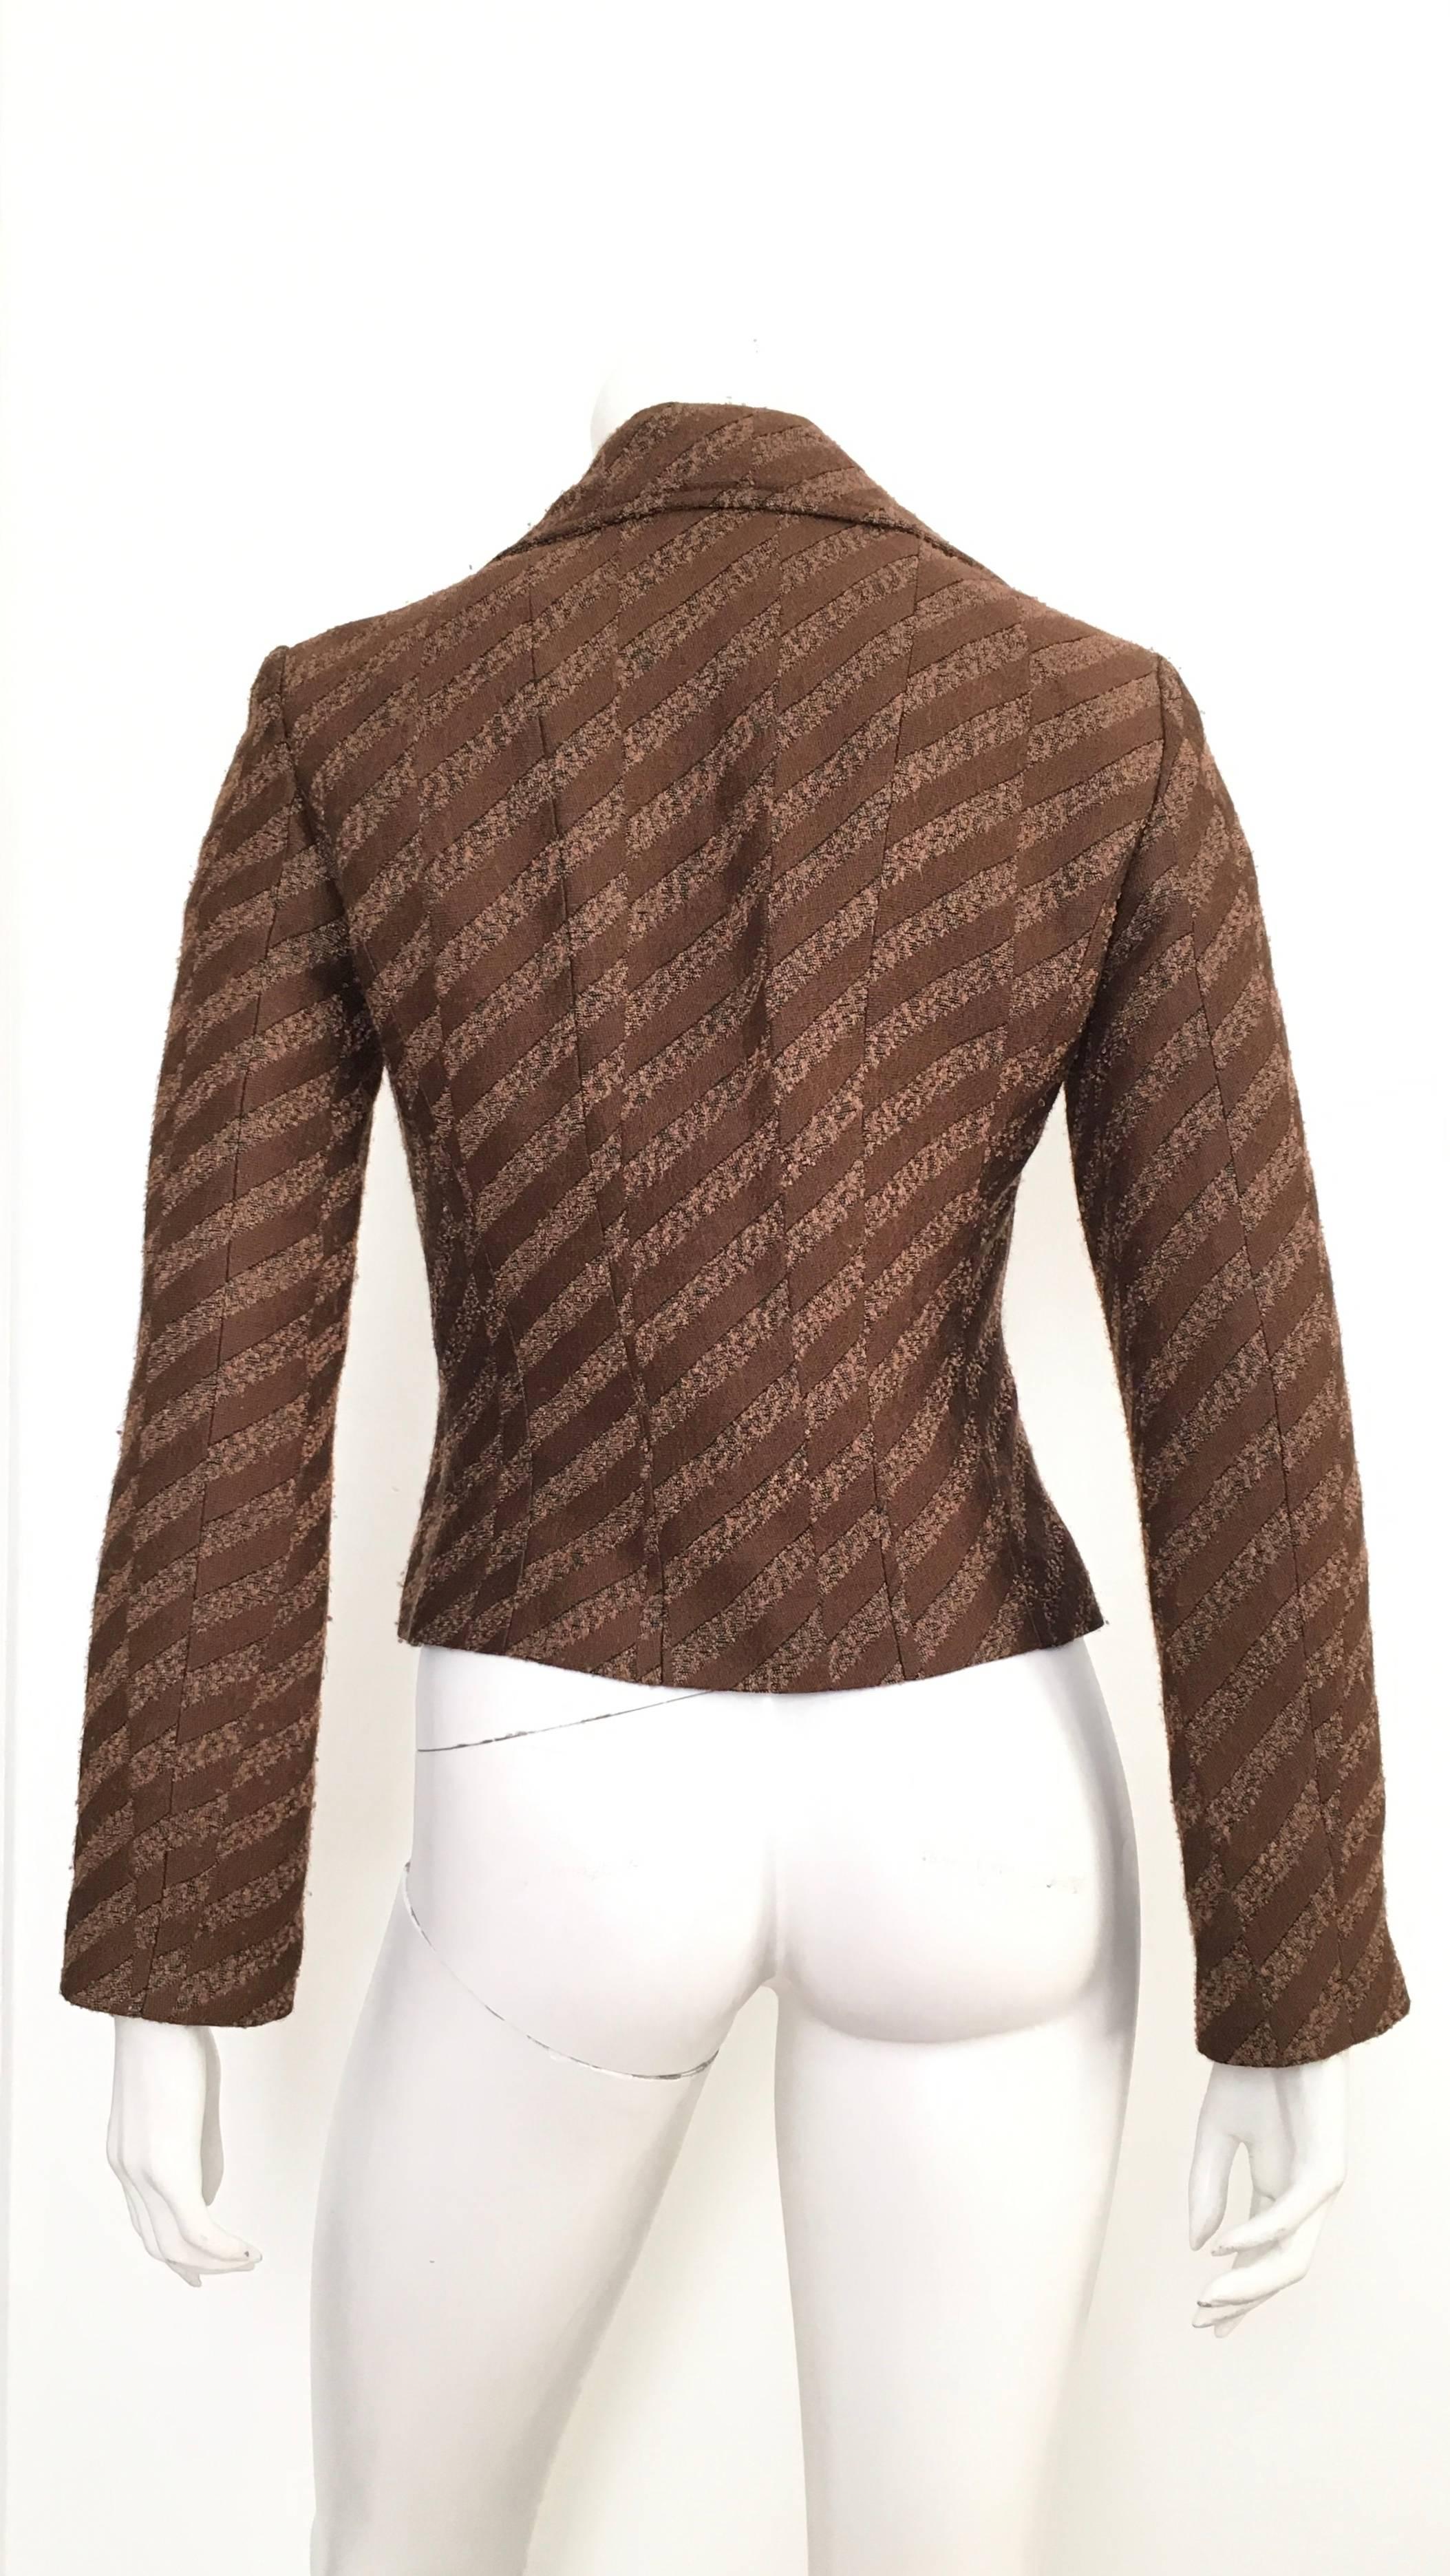 Women's or Men's Christian Lacroix Cropped Brown Jacket Size 4. For Sale